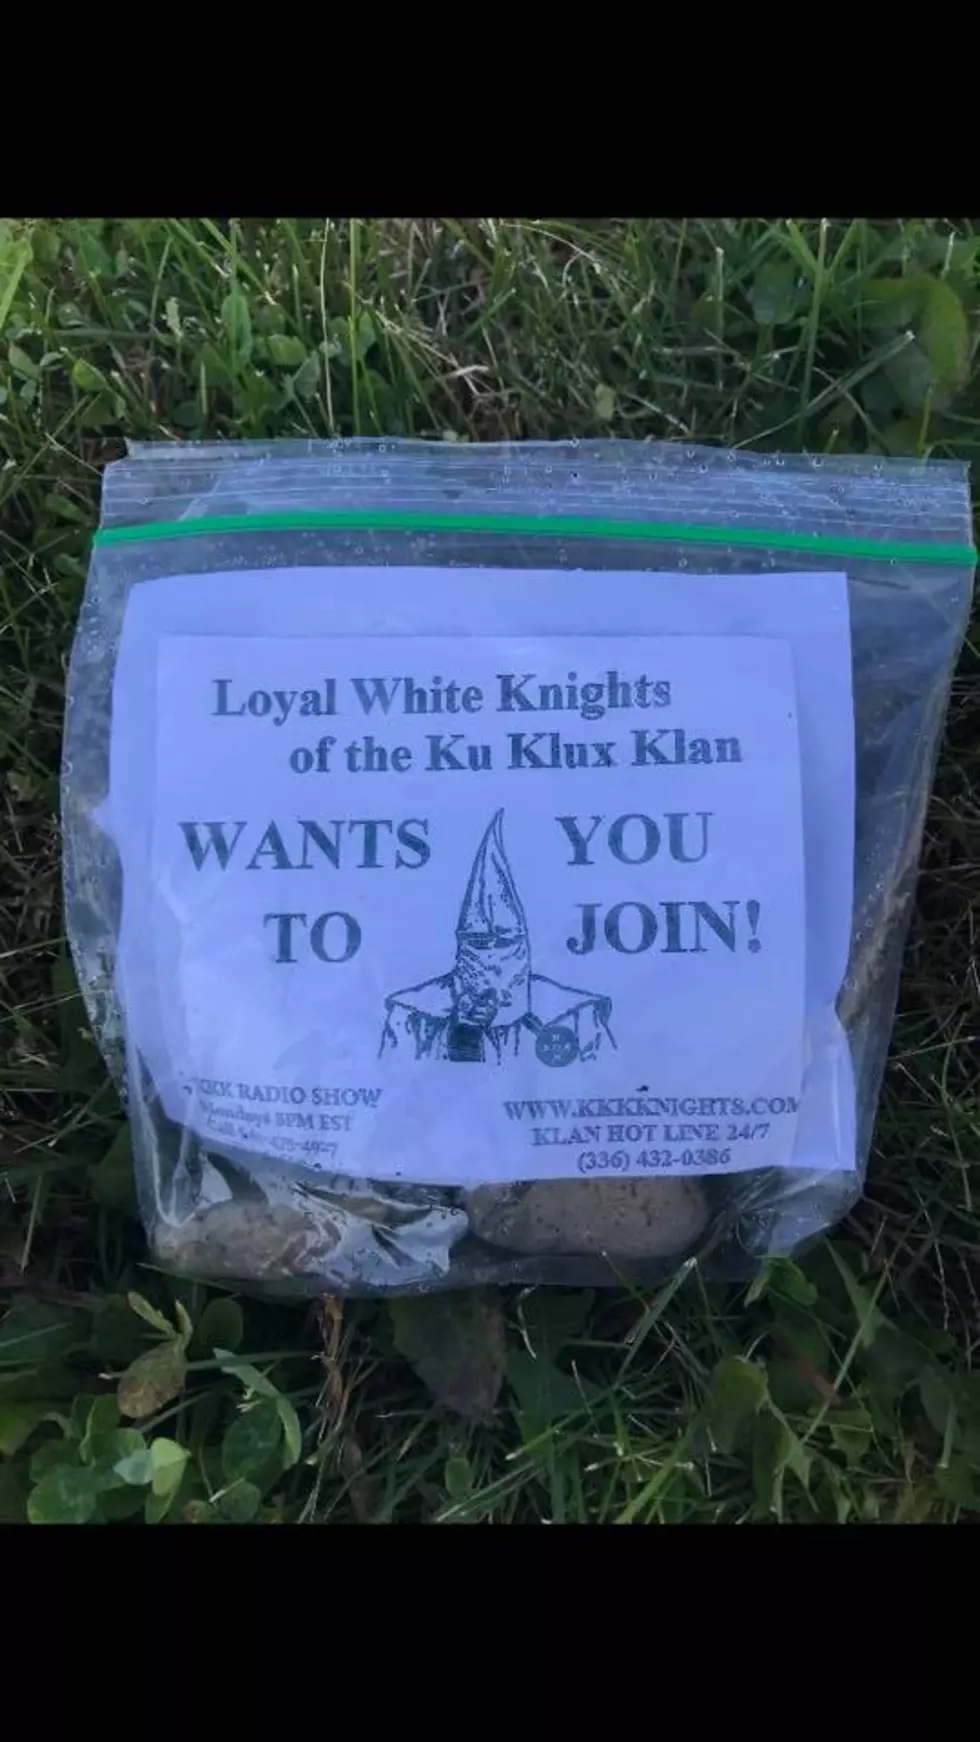 Illinois Residents Finding Unsolicited KKK Recruitment Materials